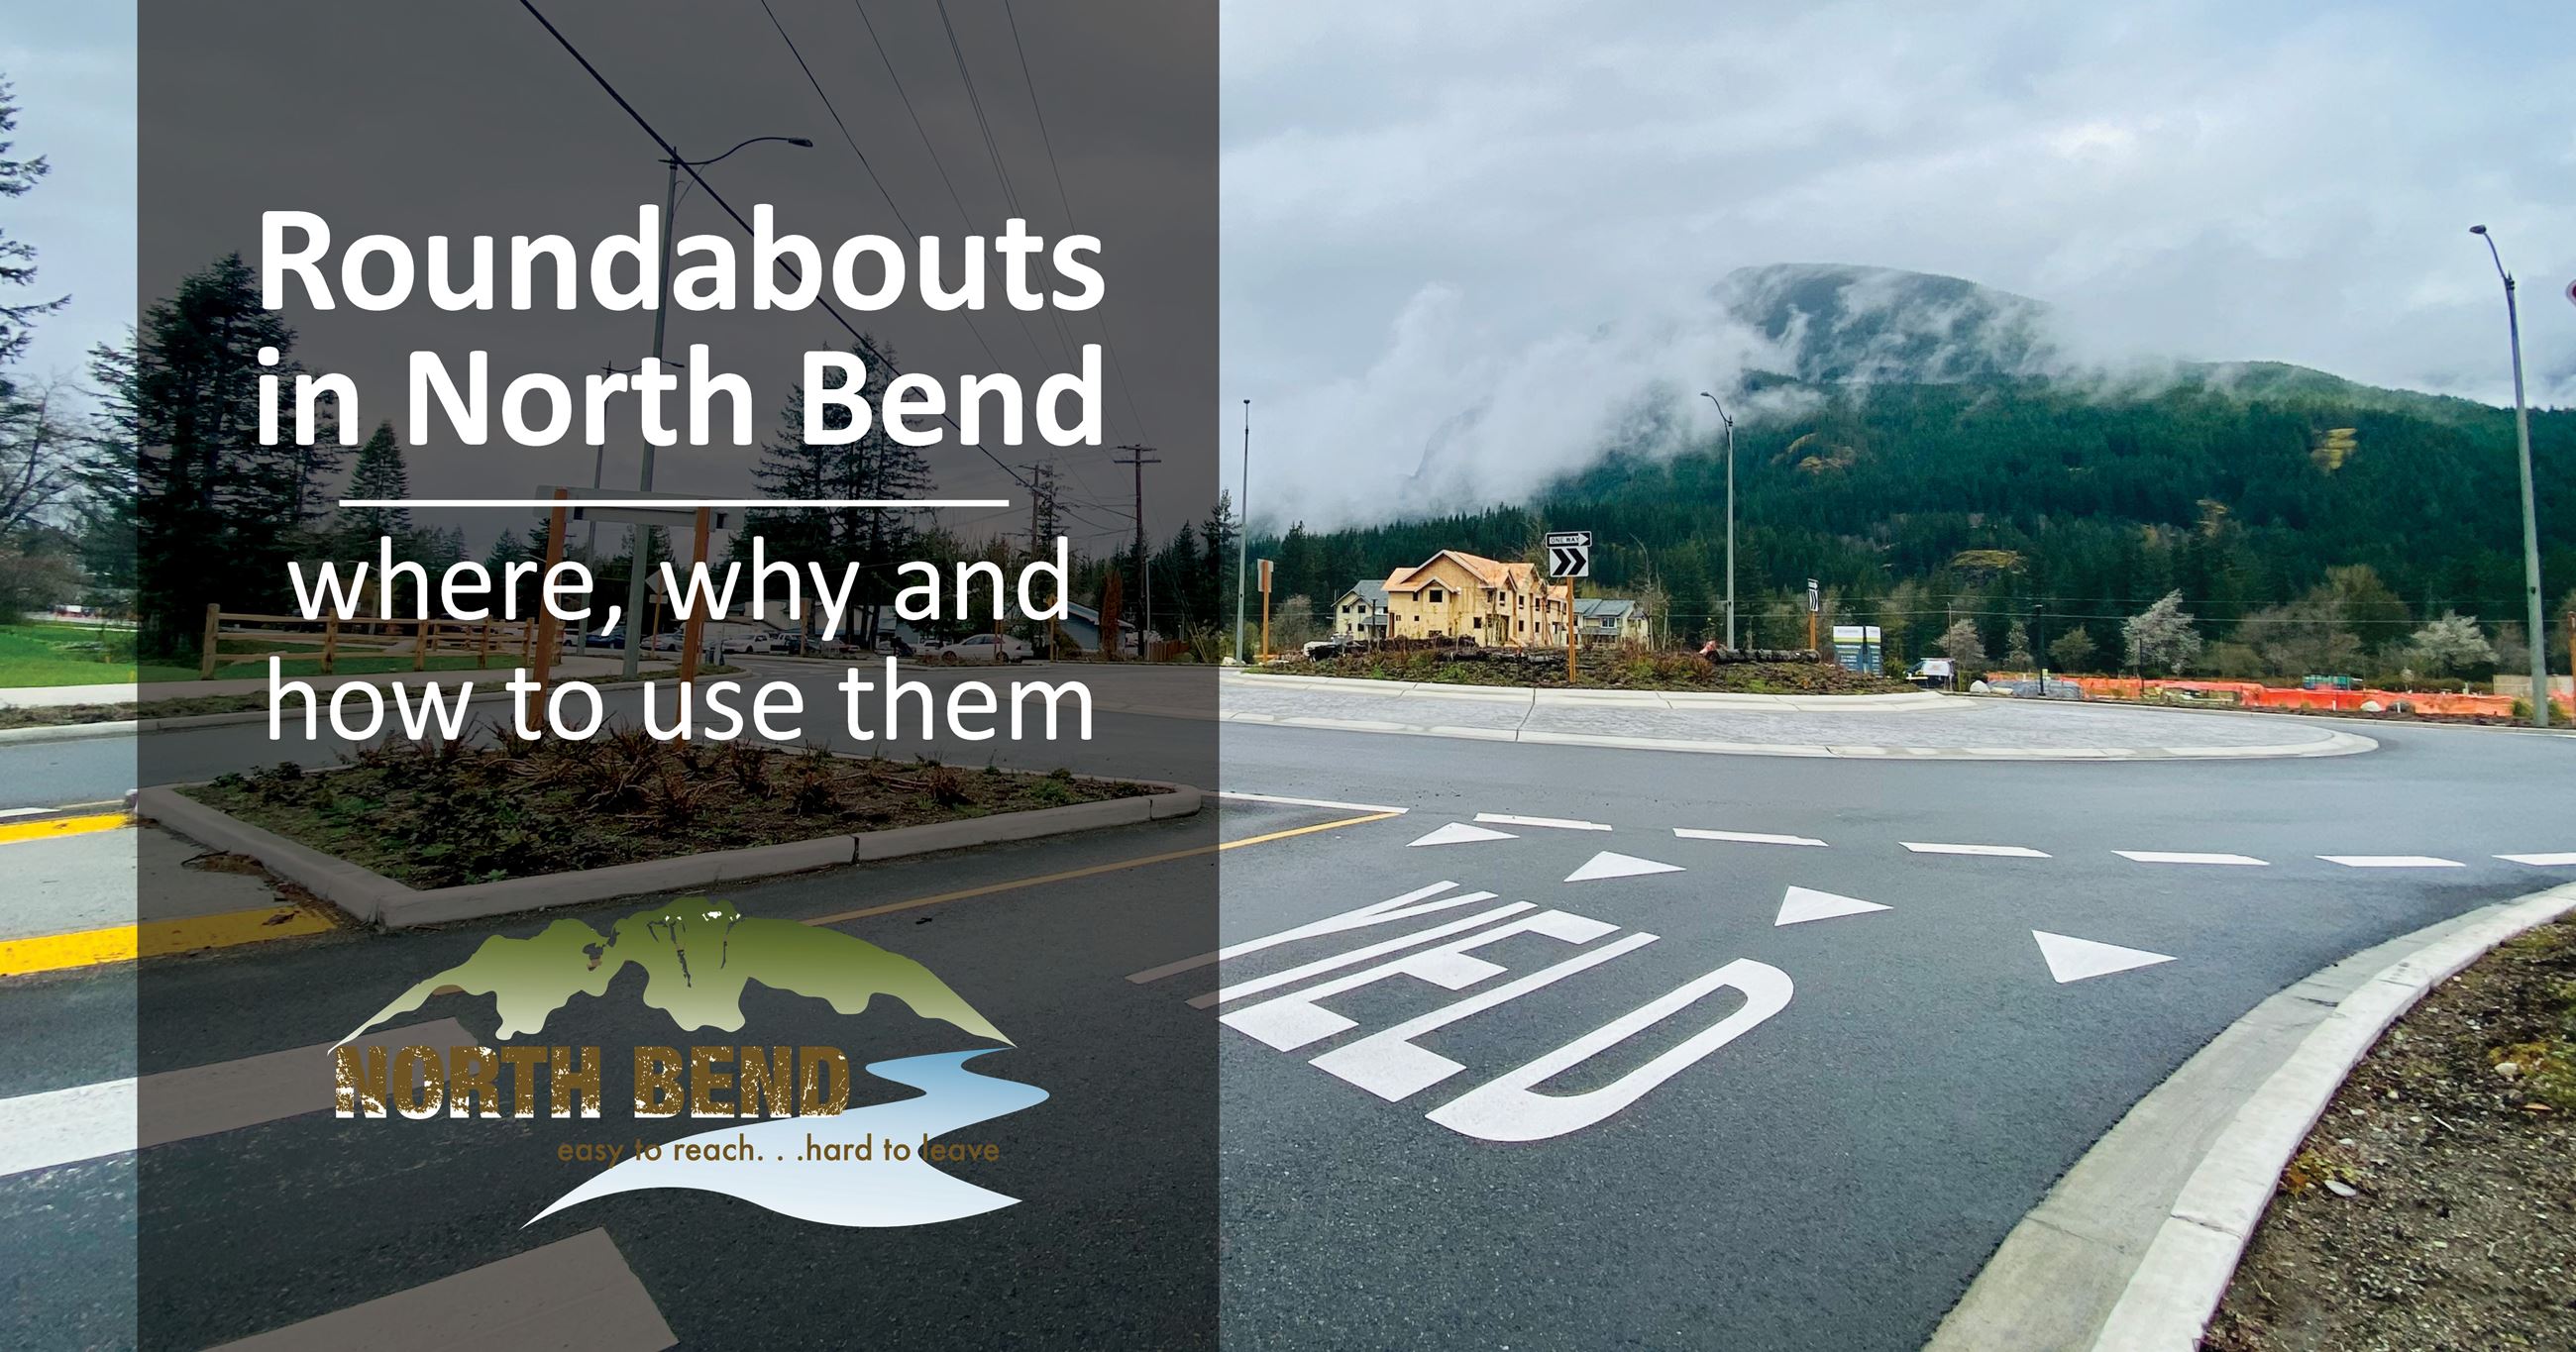  Roundabouts in North Bend: where, why, and how to use them 